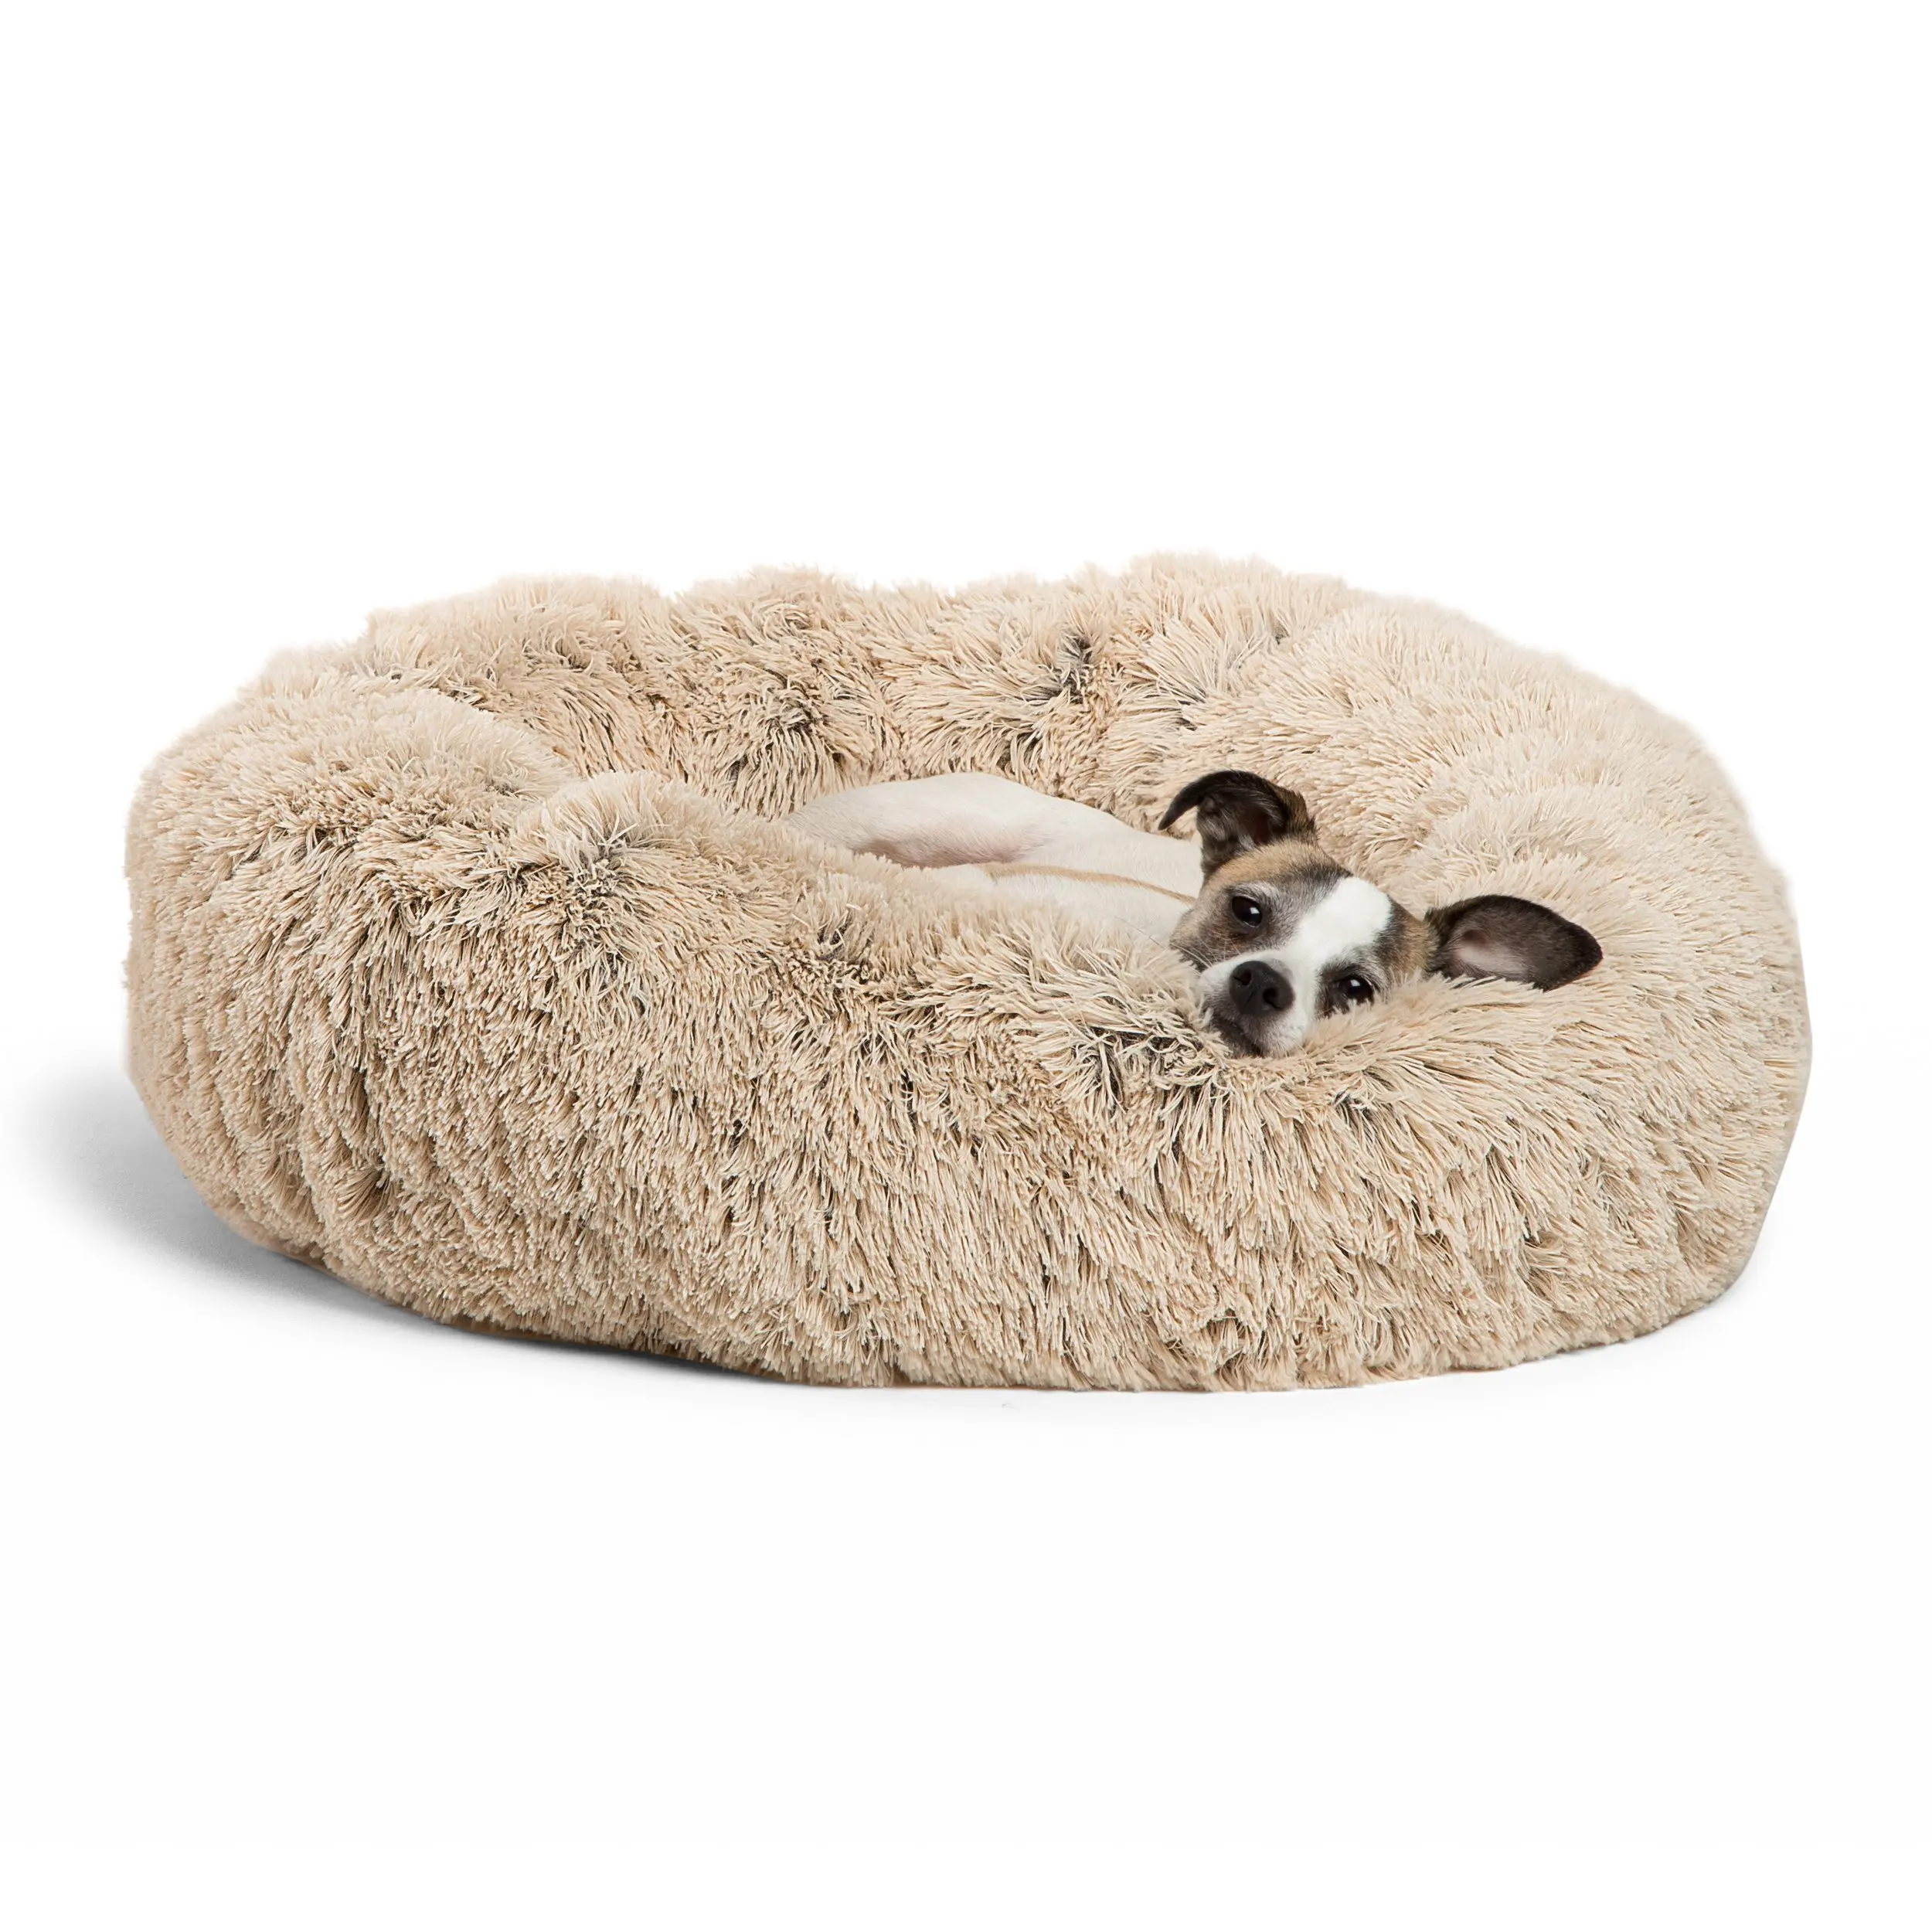 Multiple Sizes Round Cat and Dog Cushion Bed Orthopedic Relief Self-Warming and Cozy for Improved Sleep Prime Machine Washable Water-Resistant Bottom Luxury Fur Donut Cuddler